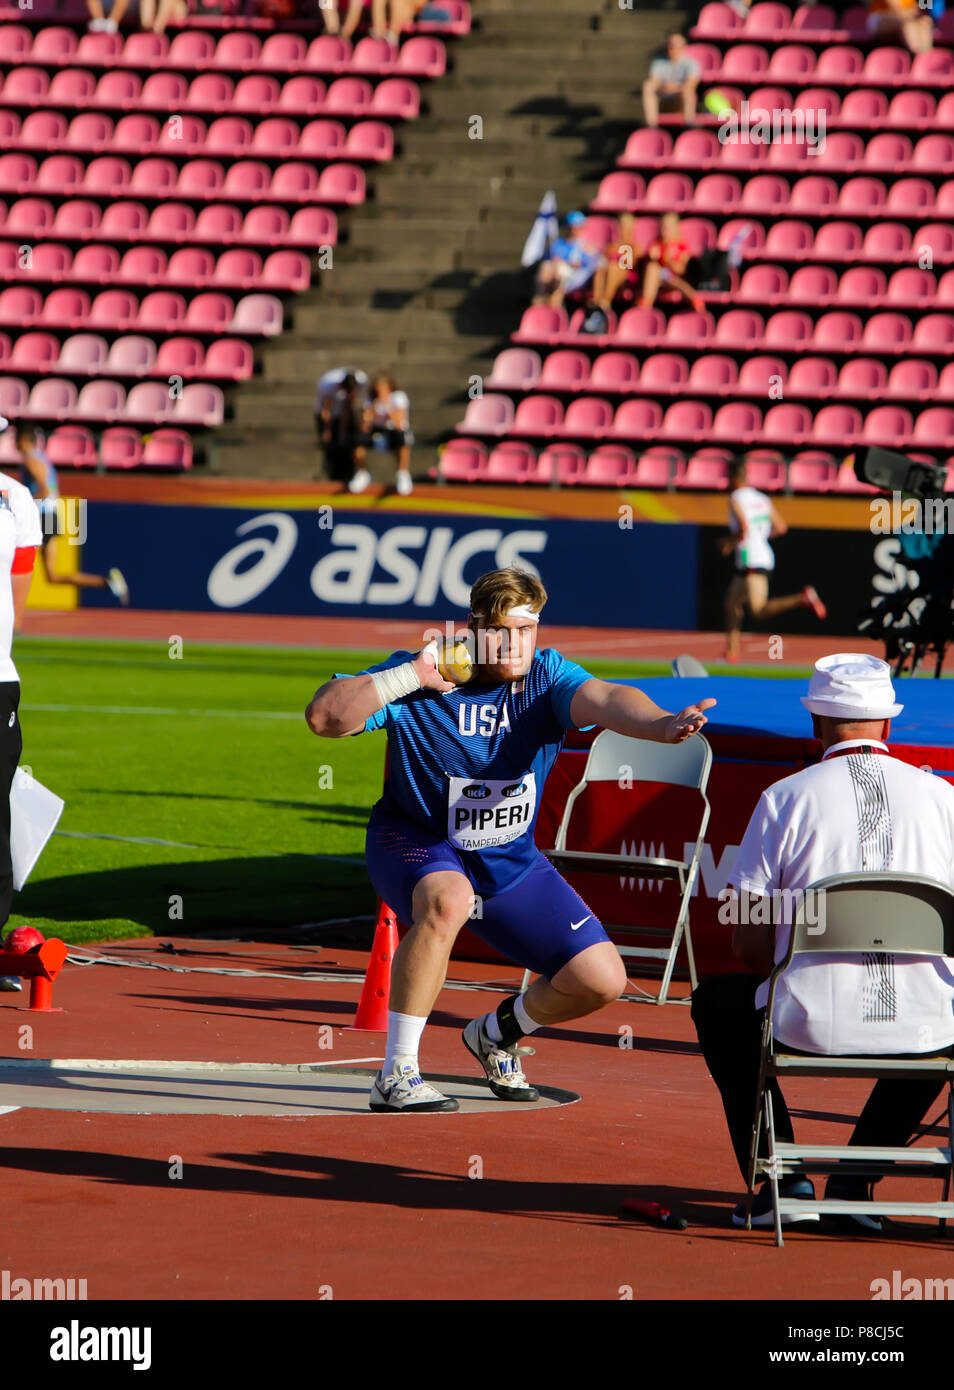 TAMPERE, FINLAND,  July 10: Adrian Piperi from USA win silver medal in the shot put at the IAAF World U20 Championships in Tampere, Finland on July 10, 2018. Credit: Denys Kuvaiev/Alamy Live News Stock Photo